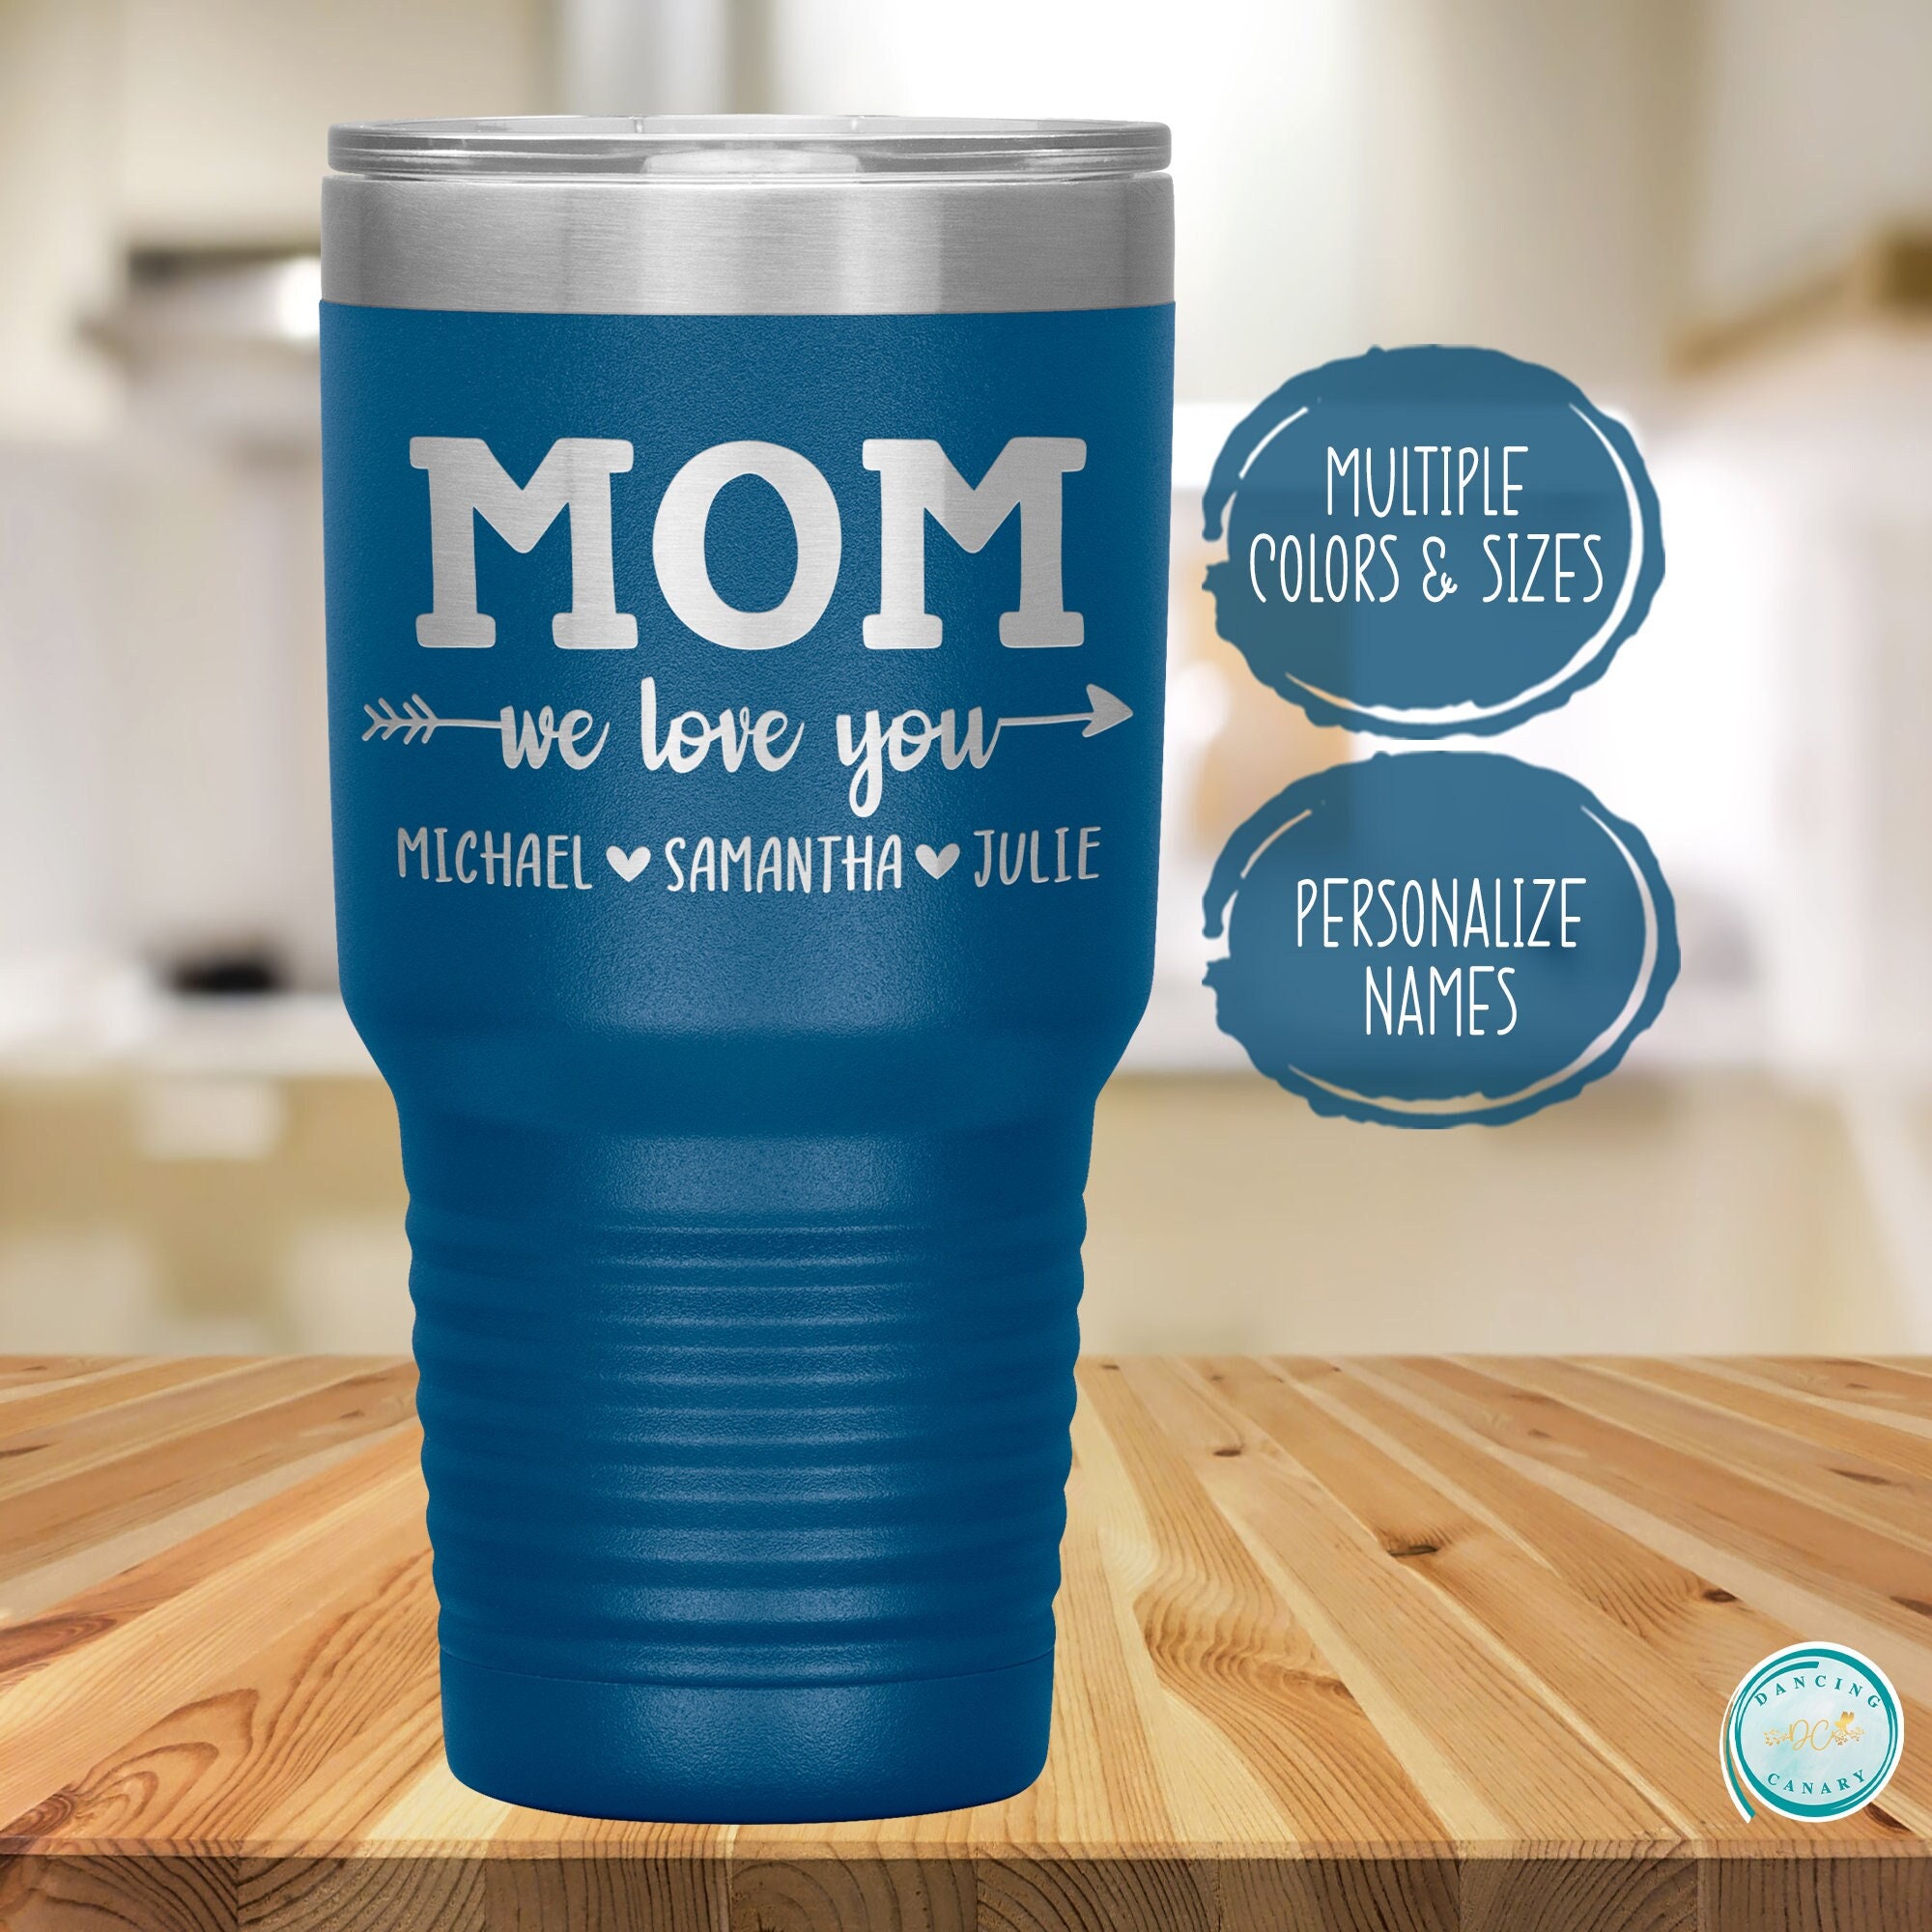 Best Mom Tumbler Best Mom Ever Tumbler with Straw and Lid Best Mom Ever Travel Tumble Birthday Mothers Day Gifts for Mom from Daughter Son Mom